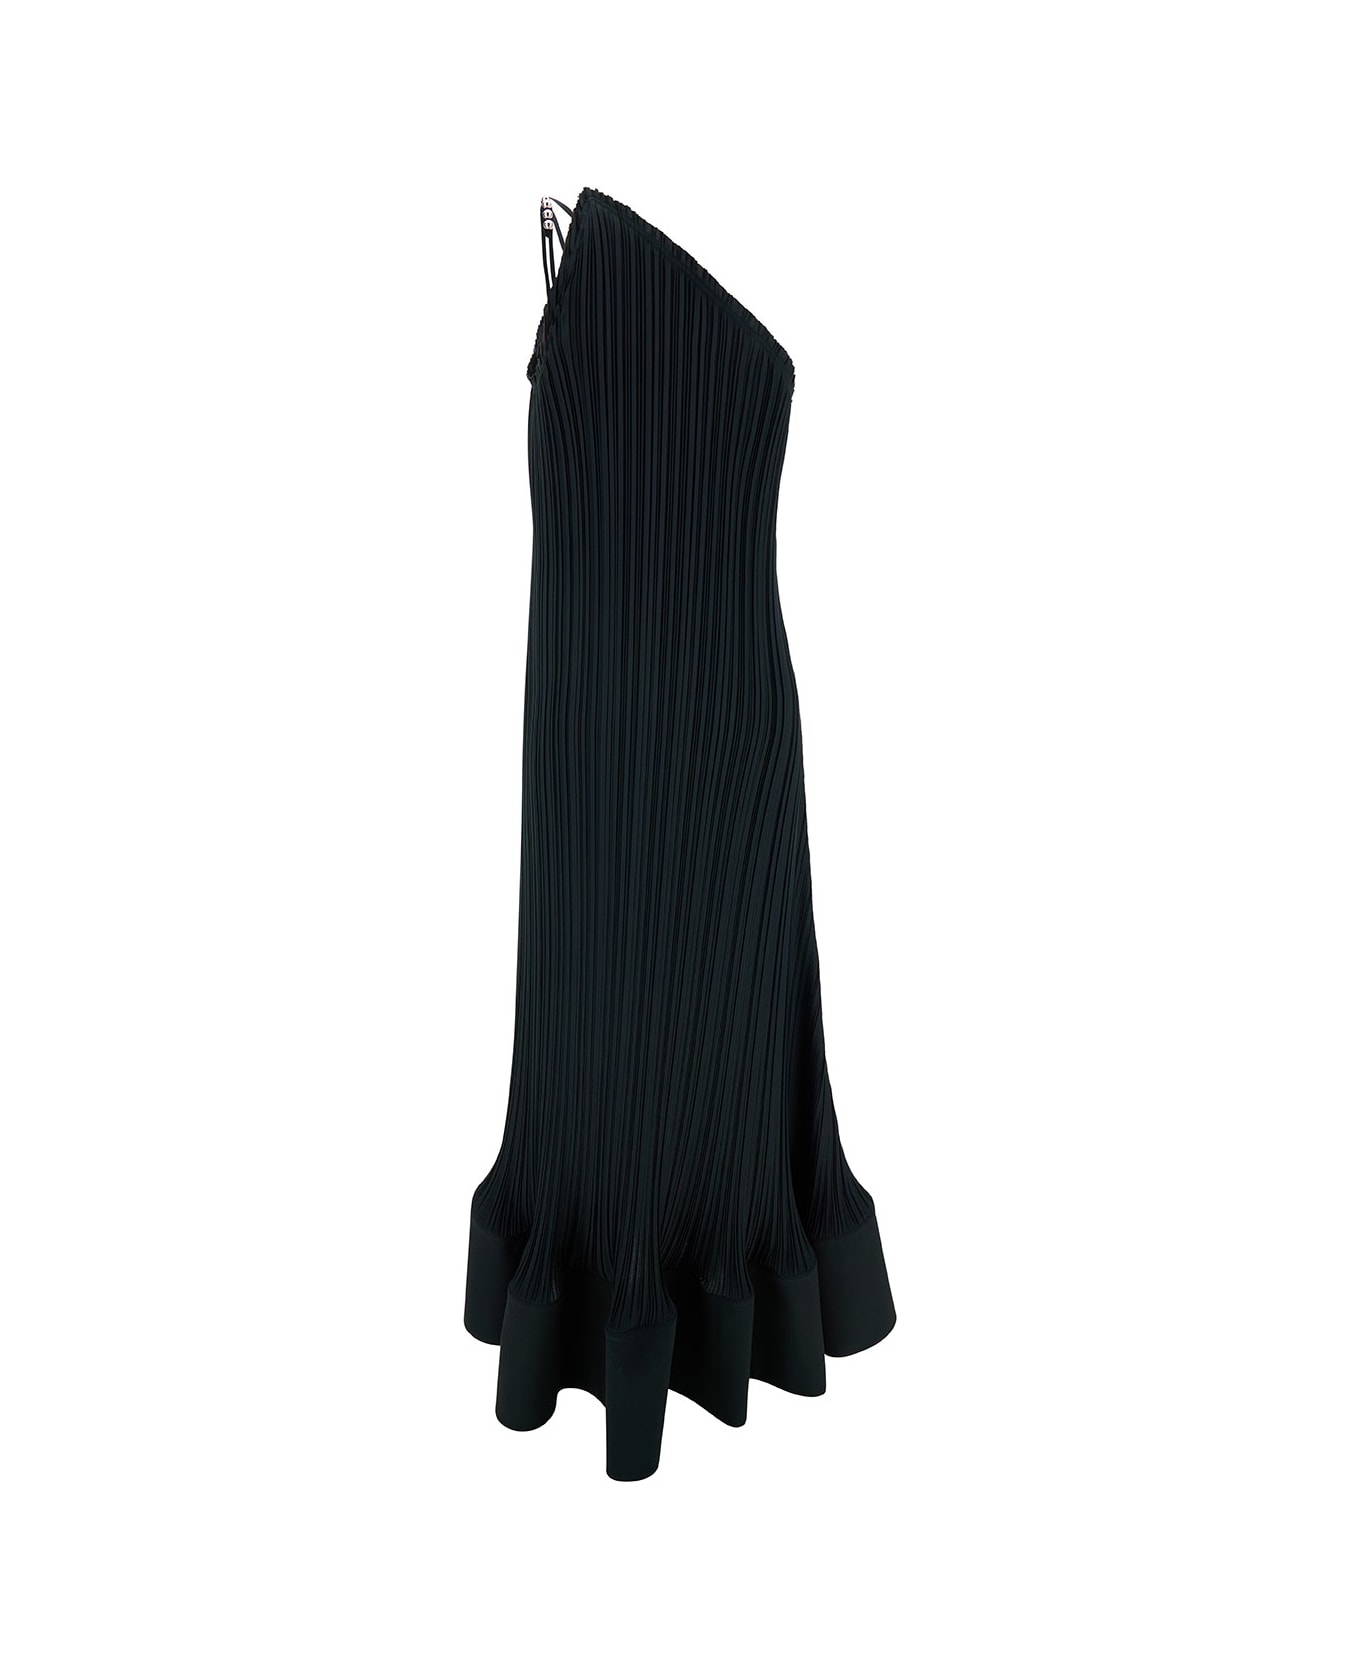 Lanvin Maxi Black One-shoulder Pleated Dress With Beads In Crêpe De Chine Woman - Black ワンピース＆ドレス